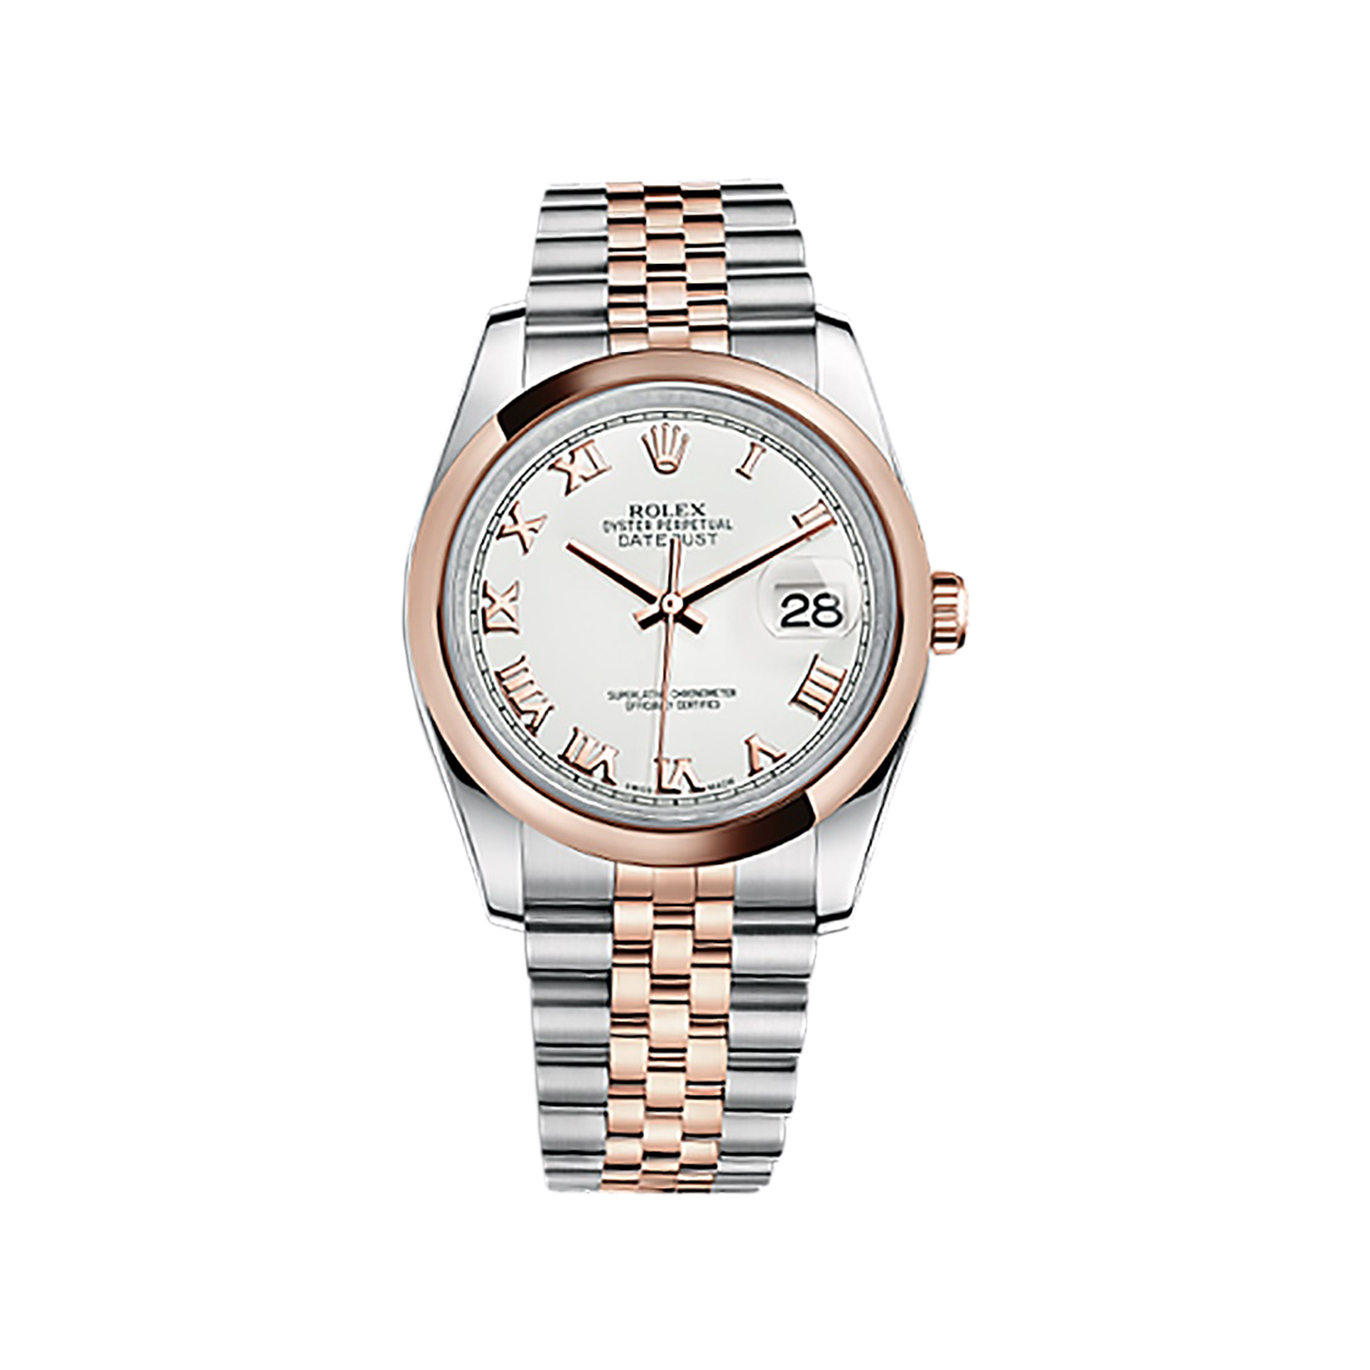 Datejust 36 116201 Rose Gold & Stainless Steel Watch (White) - Click Image to Close